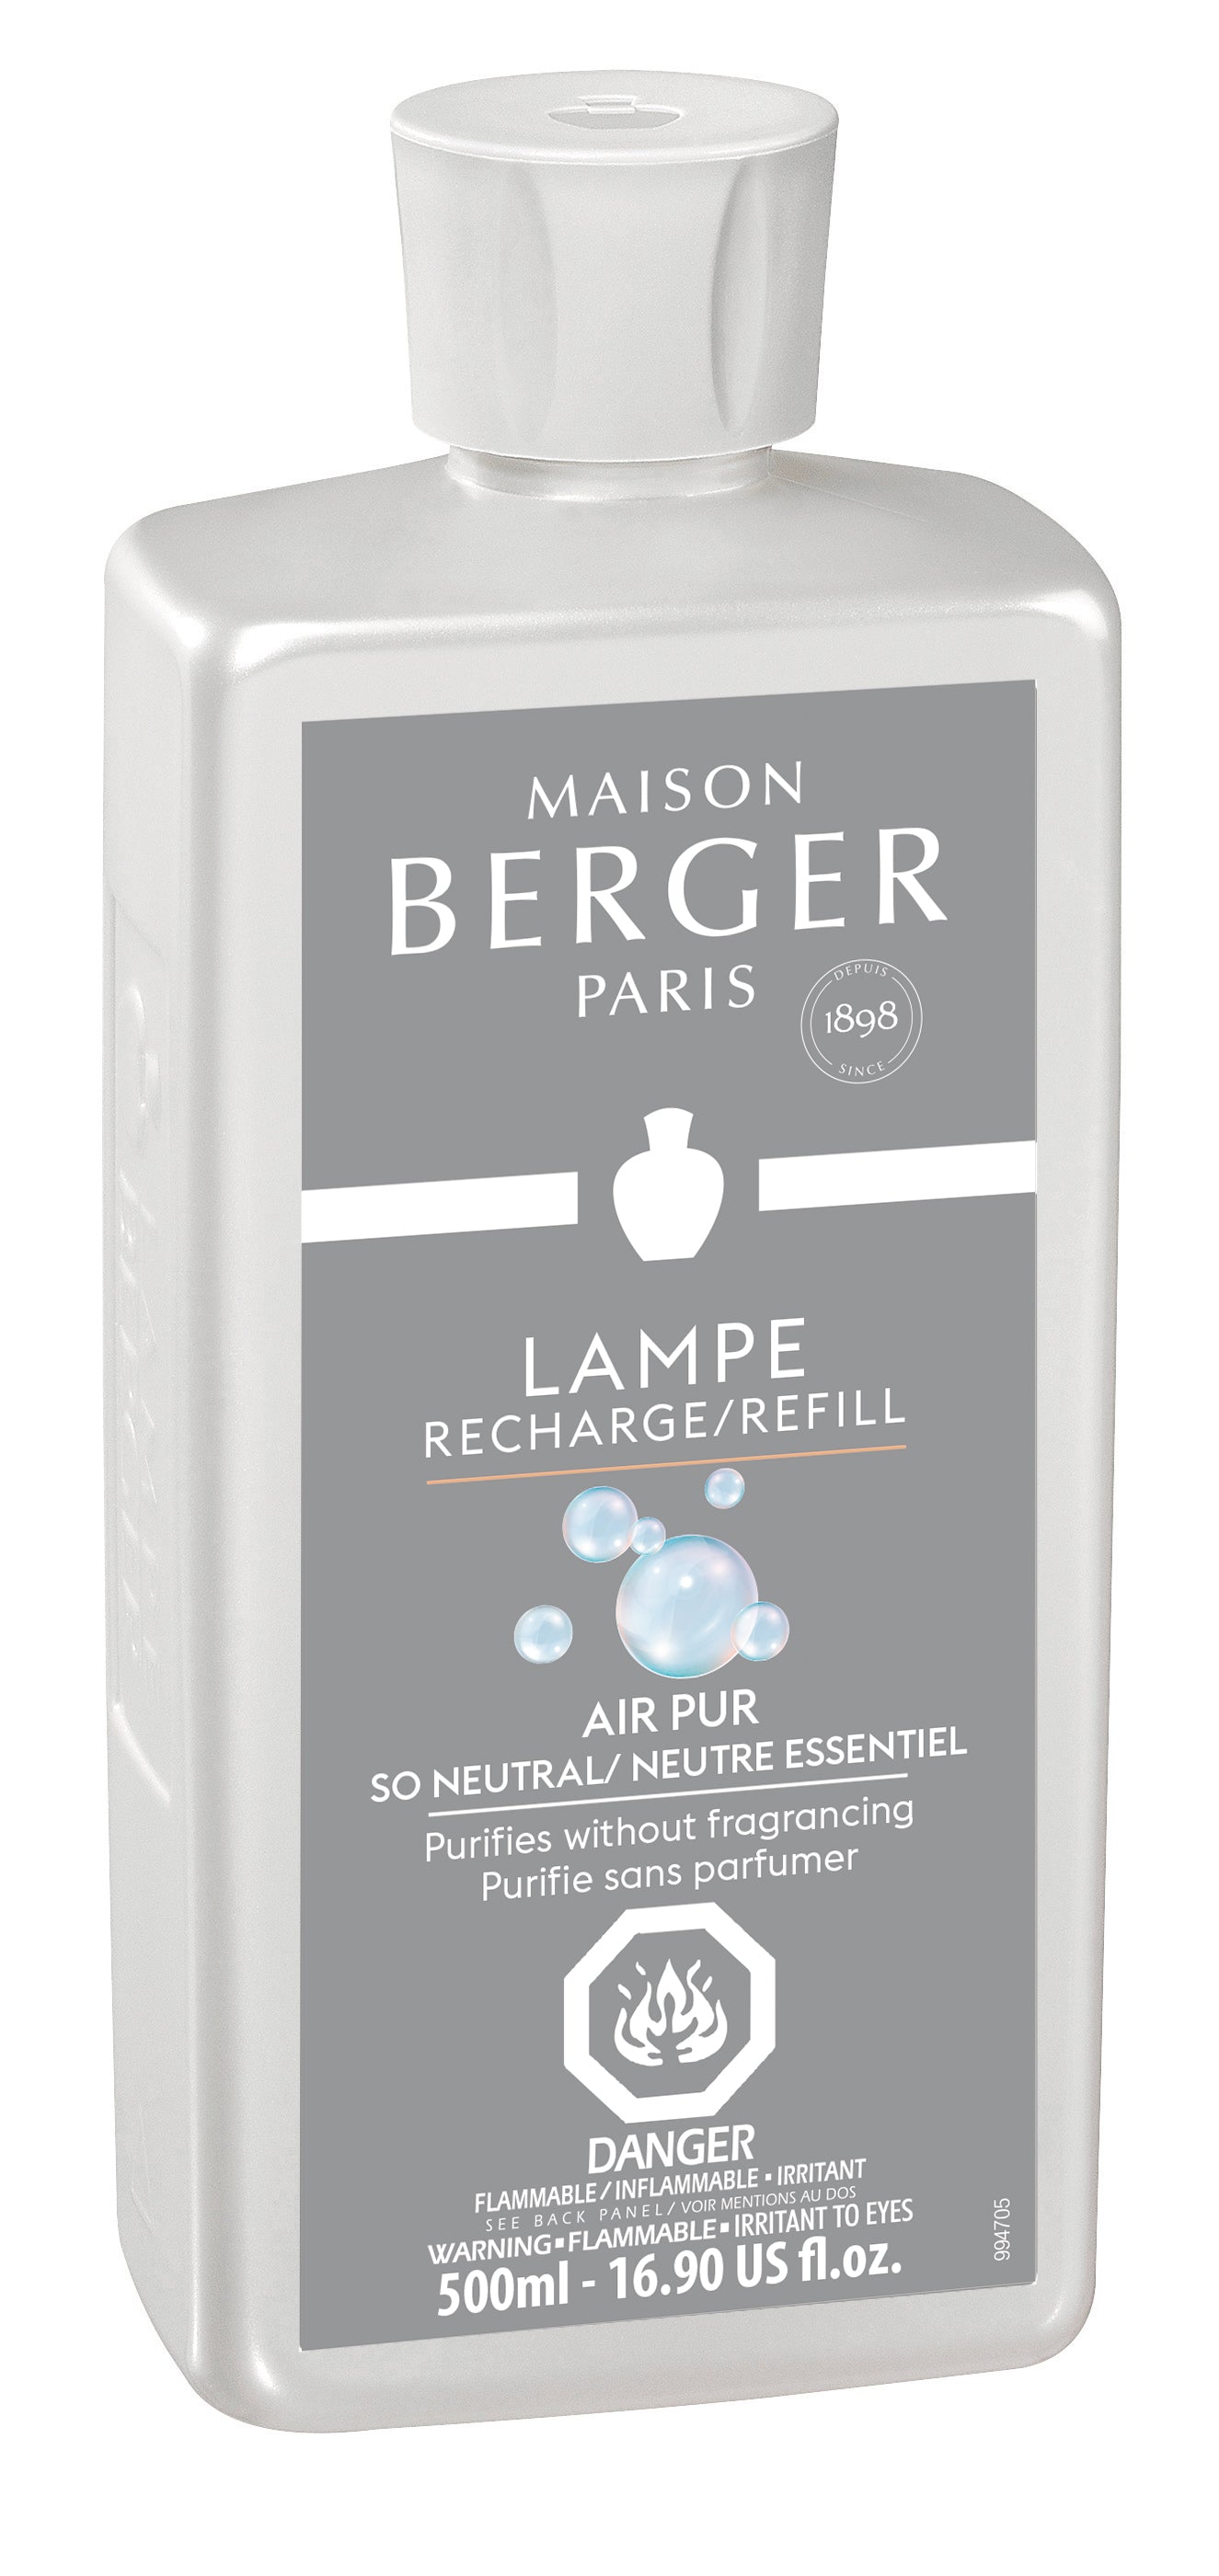 LAMPE-BERGER-SO-NEUTRAL-1L-LIFESTYLE